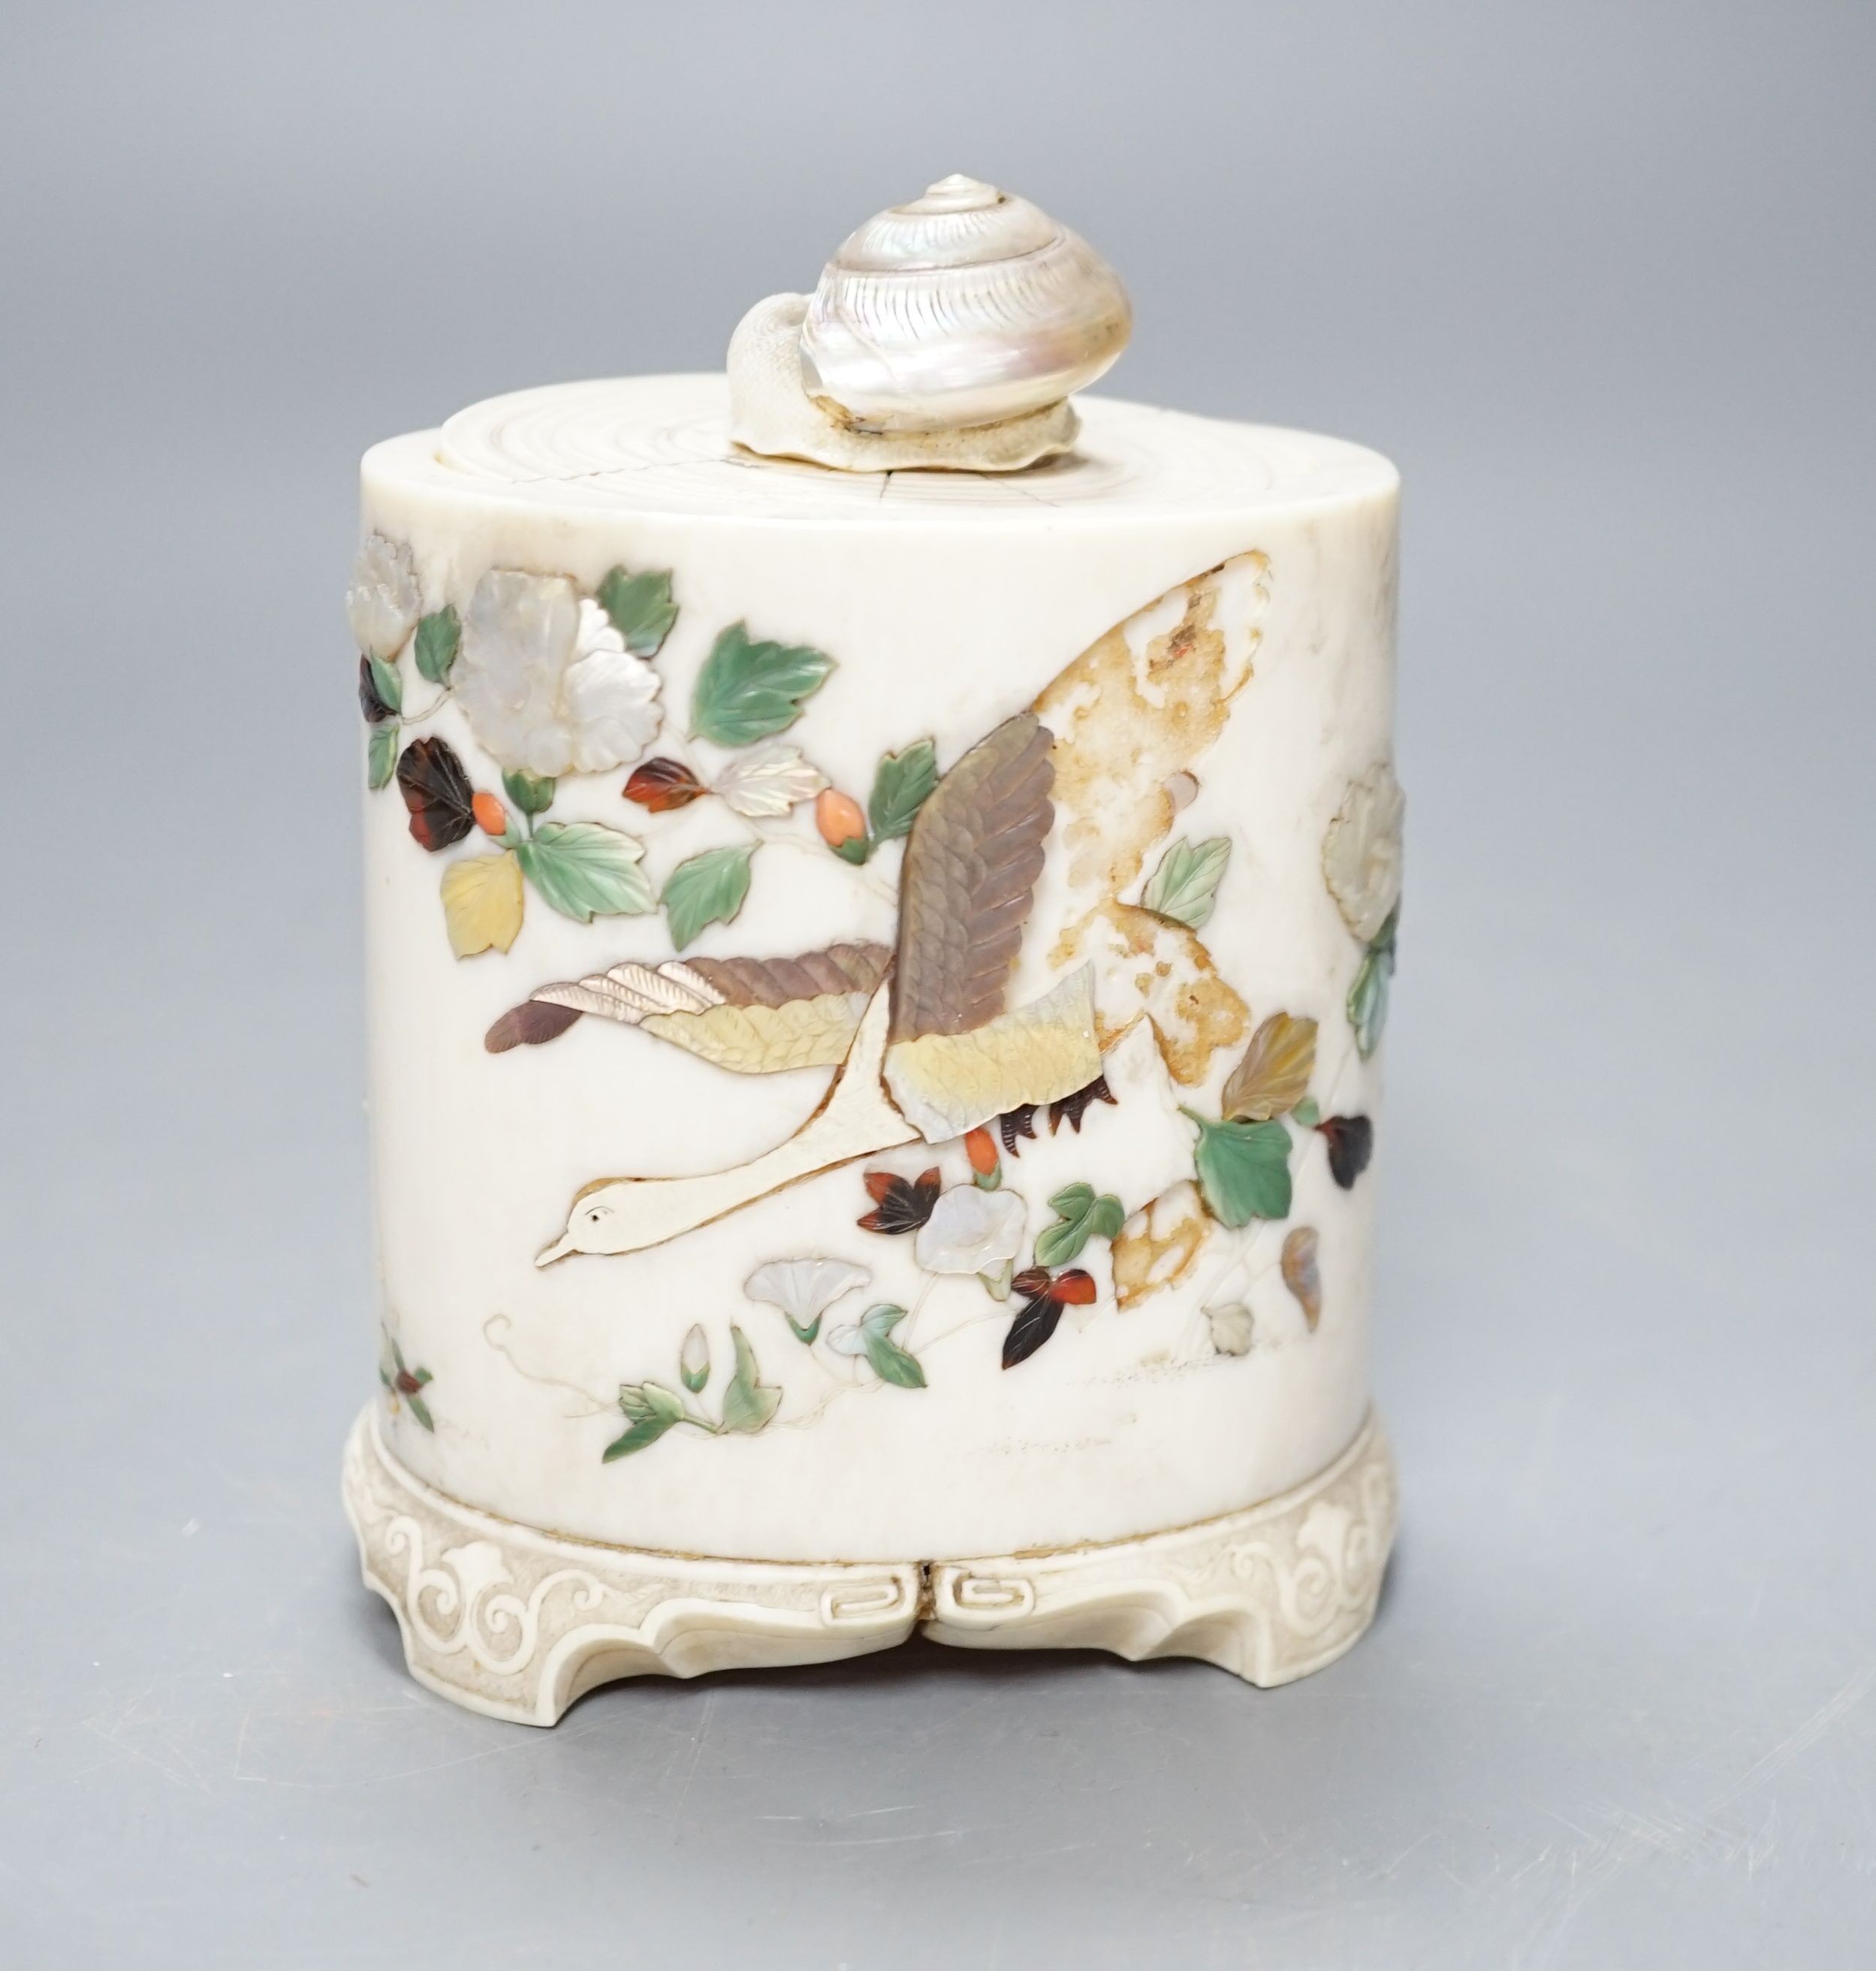 A Japanese shibayama ivory box and cover, Meiji period, with mother of pearl snail finial 12cm